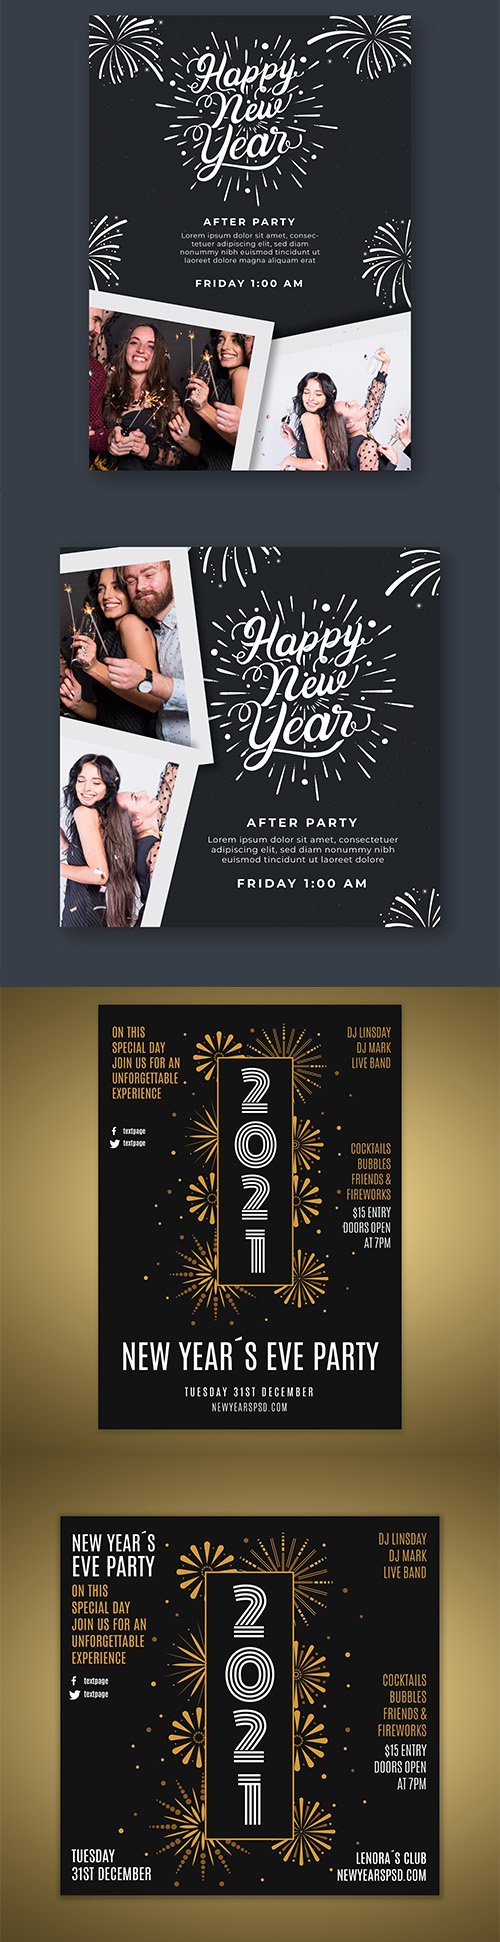 Flyer template for new years party